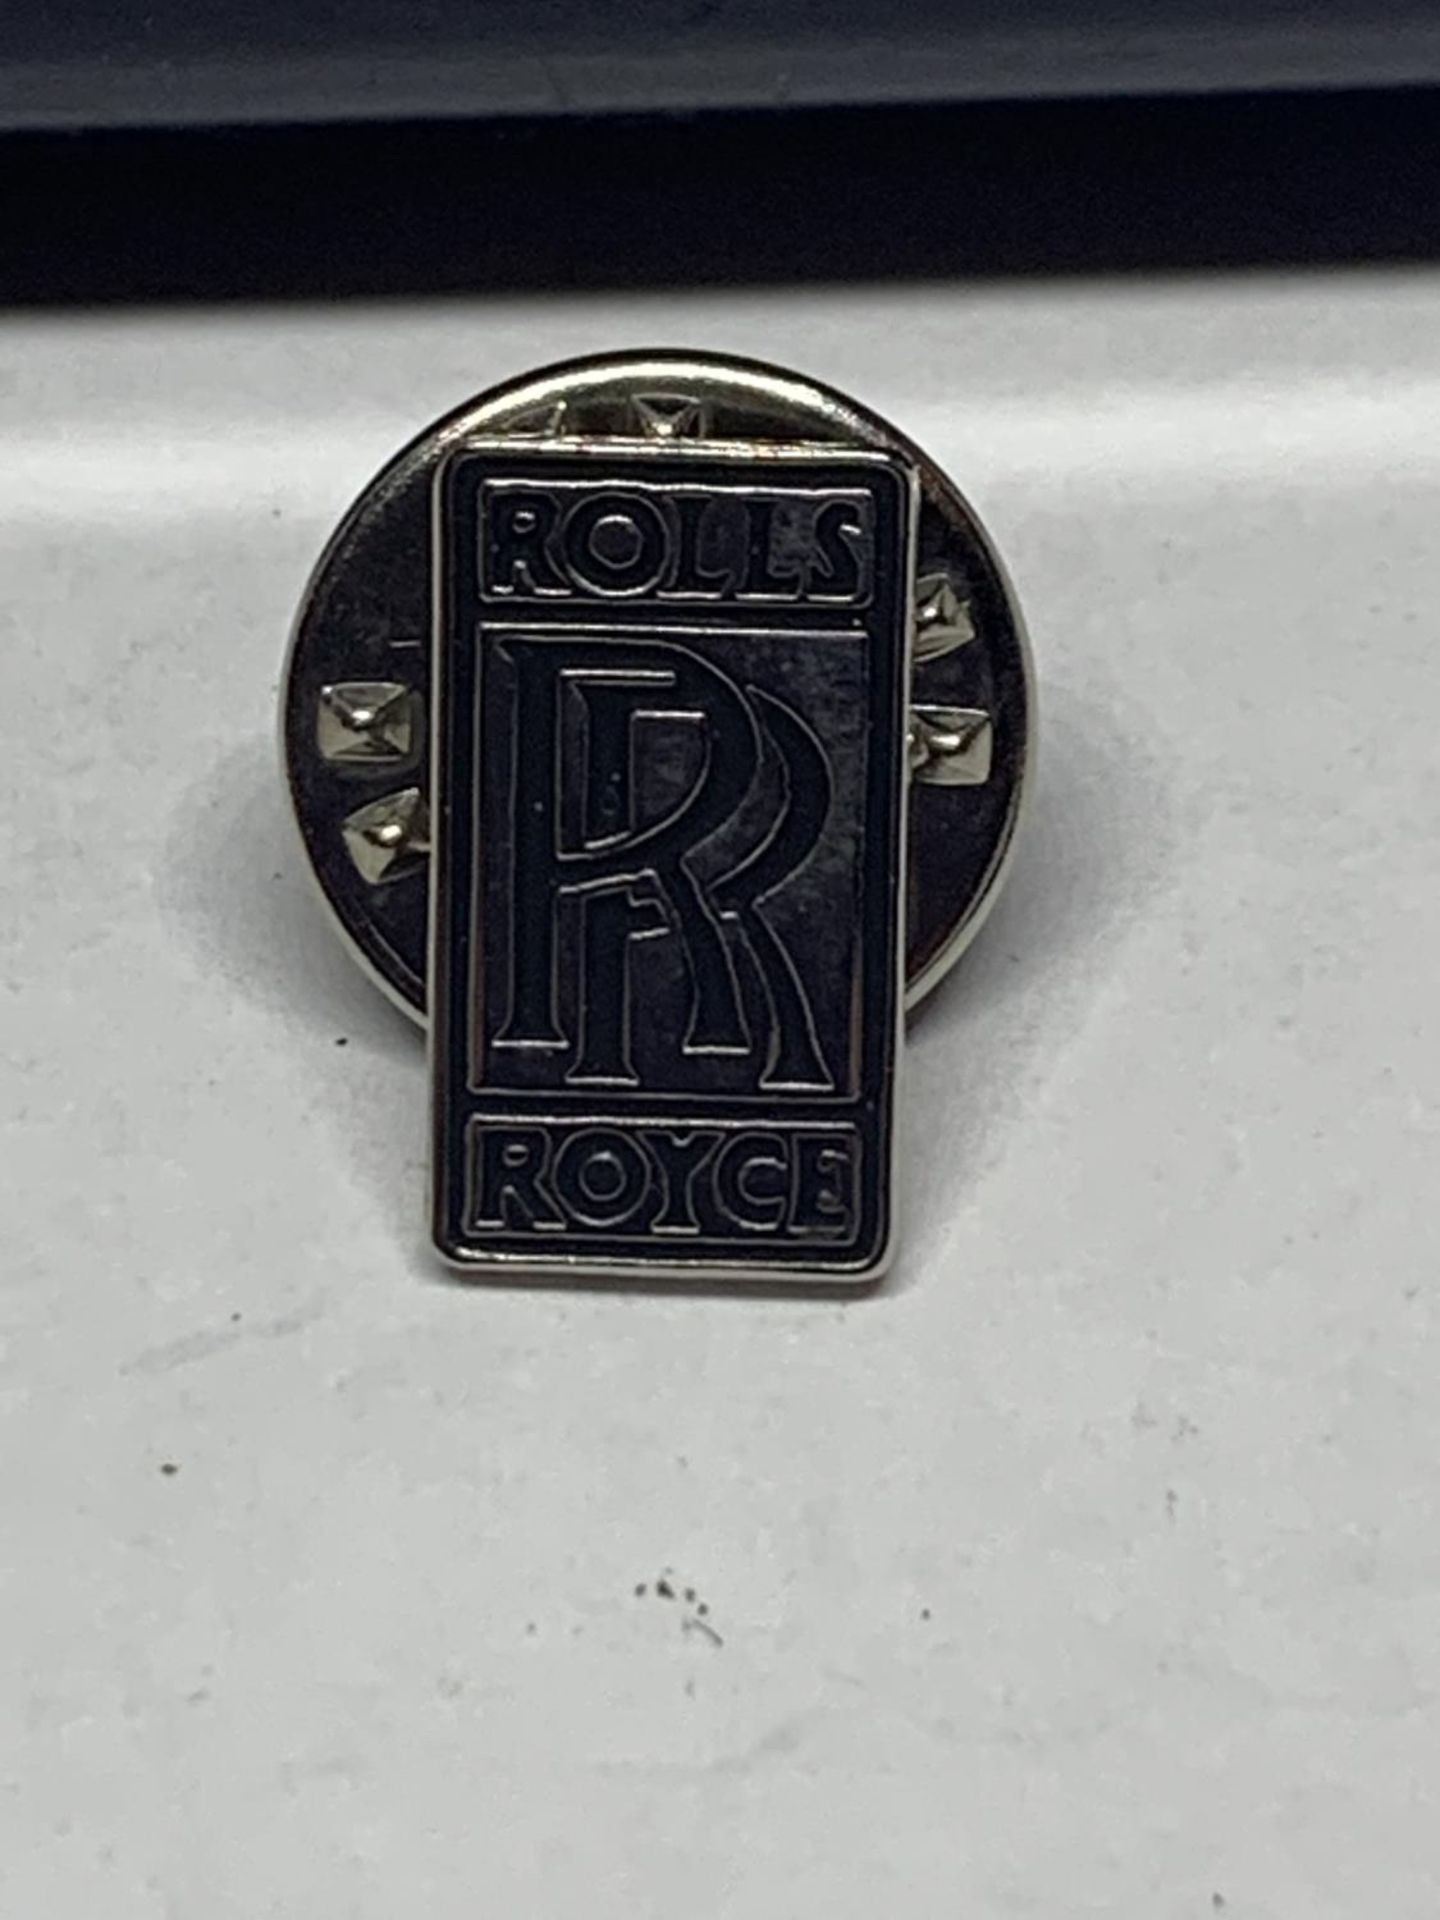 TWO ROLLS ROYCE BADGES IN A PRESENTATION BOX - Image 2 of 3